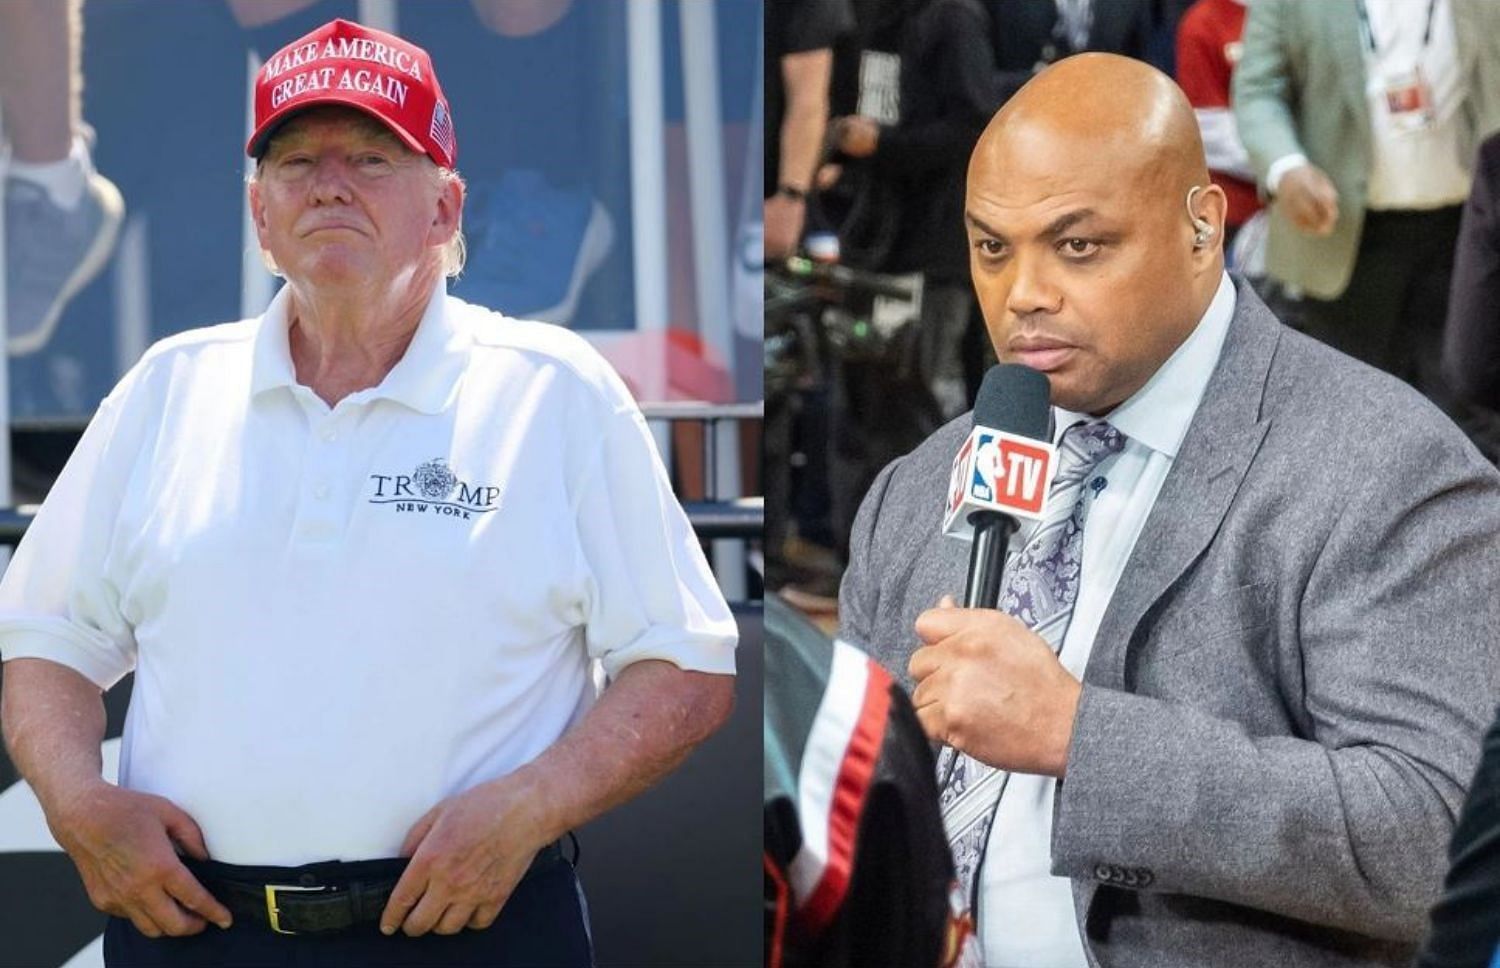 NBA legend Charles Barkley (R) took a dig at former U.S. president Donald Trump and his supporters in his CNN show.